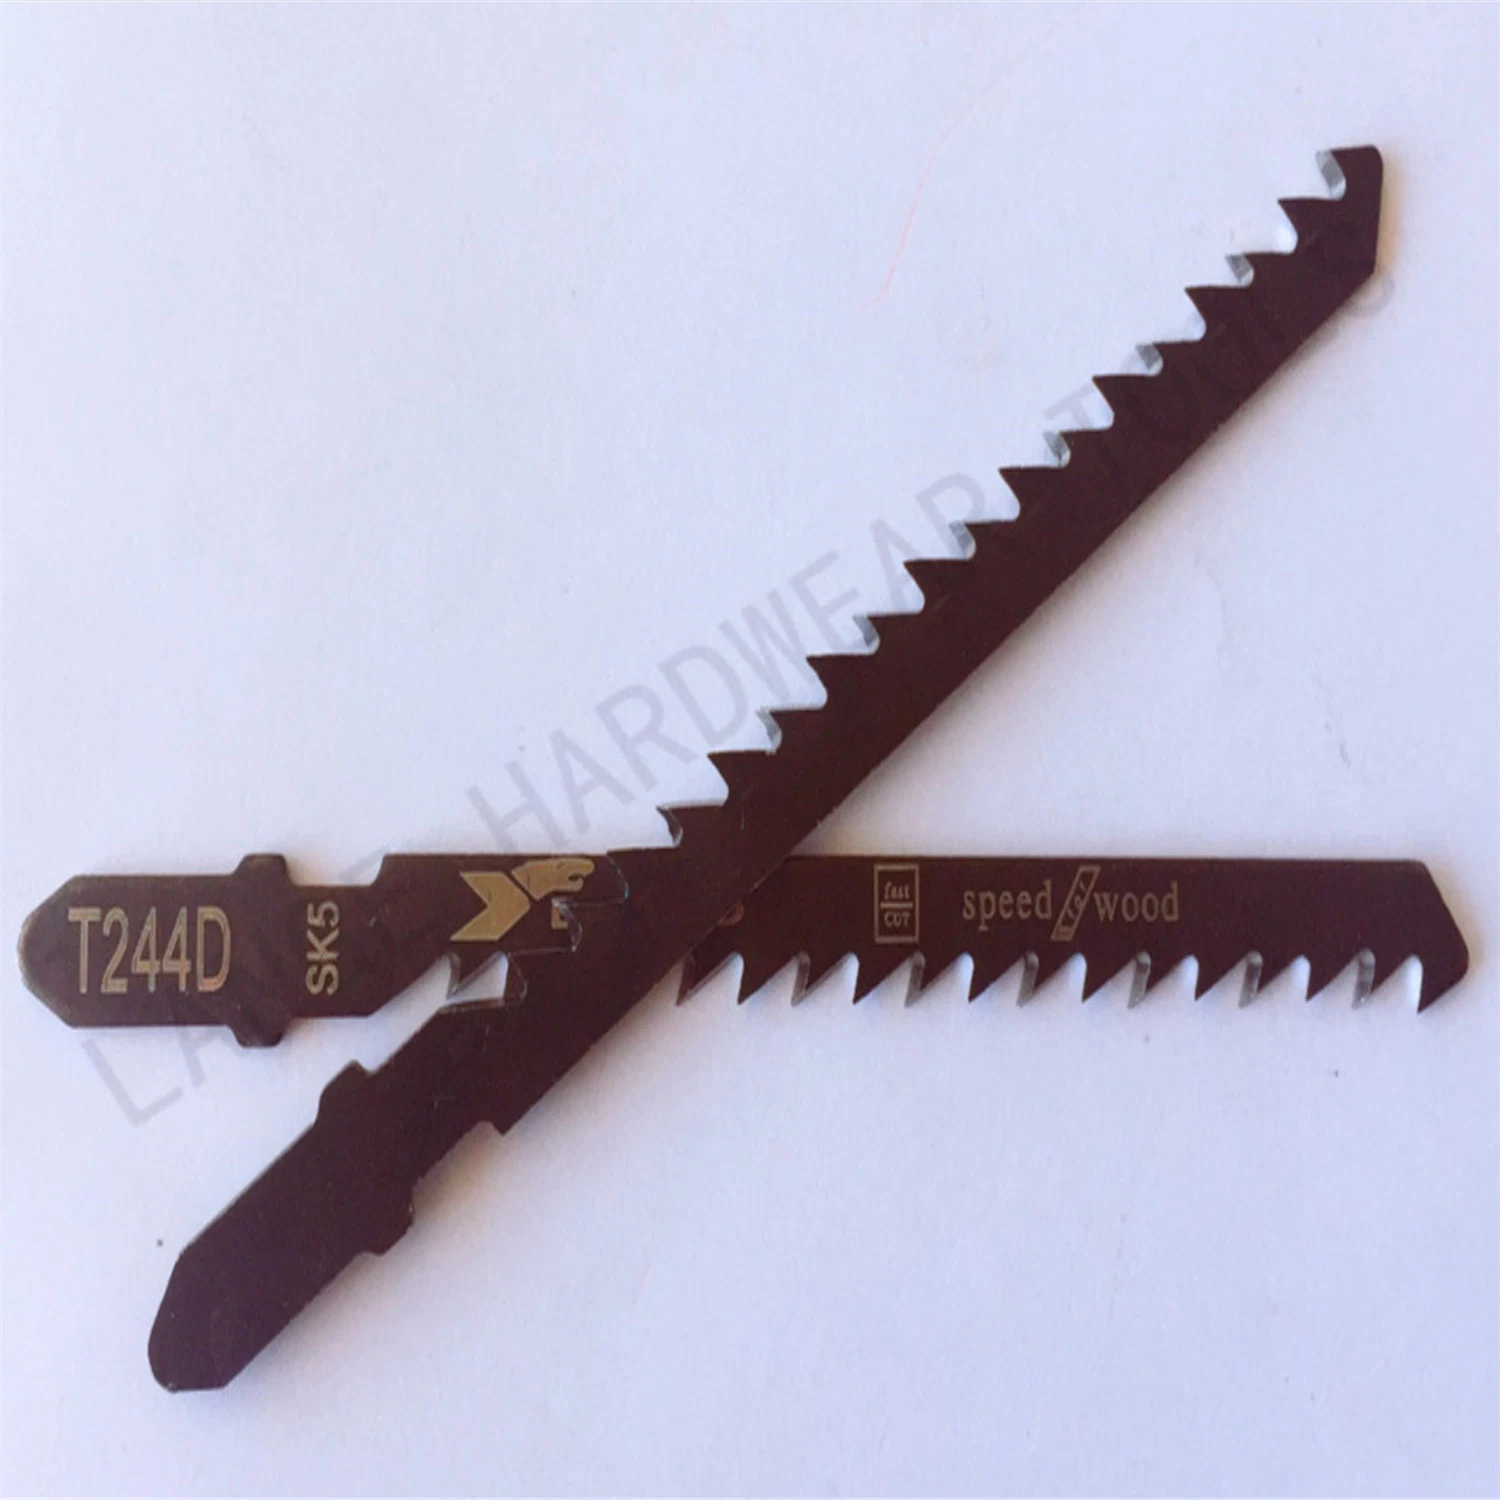 Electric Power Tools Jig Saw Blade for Cutting Wood